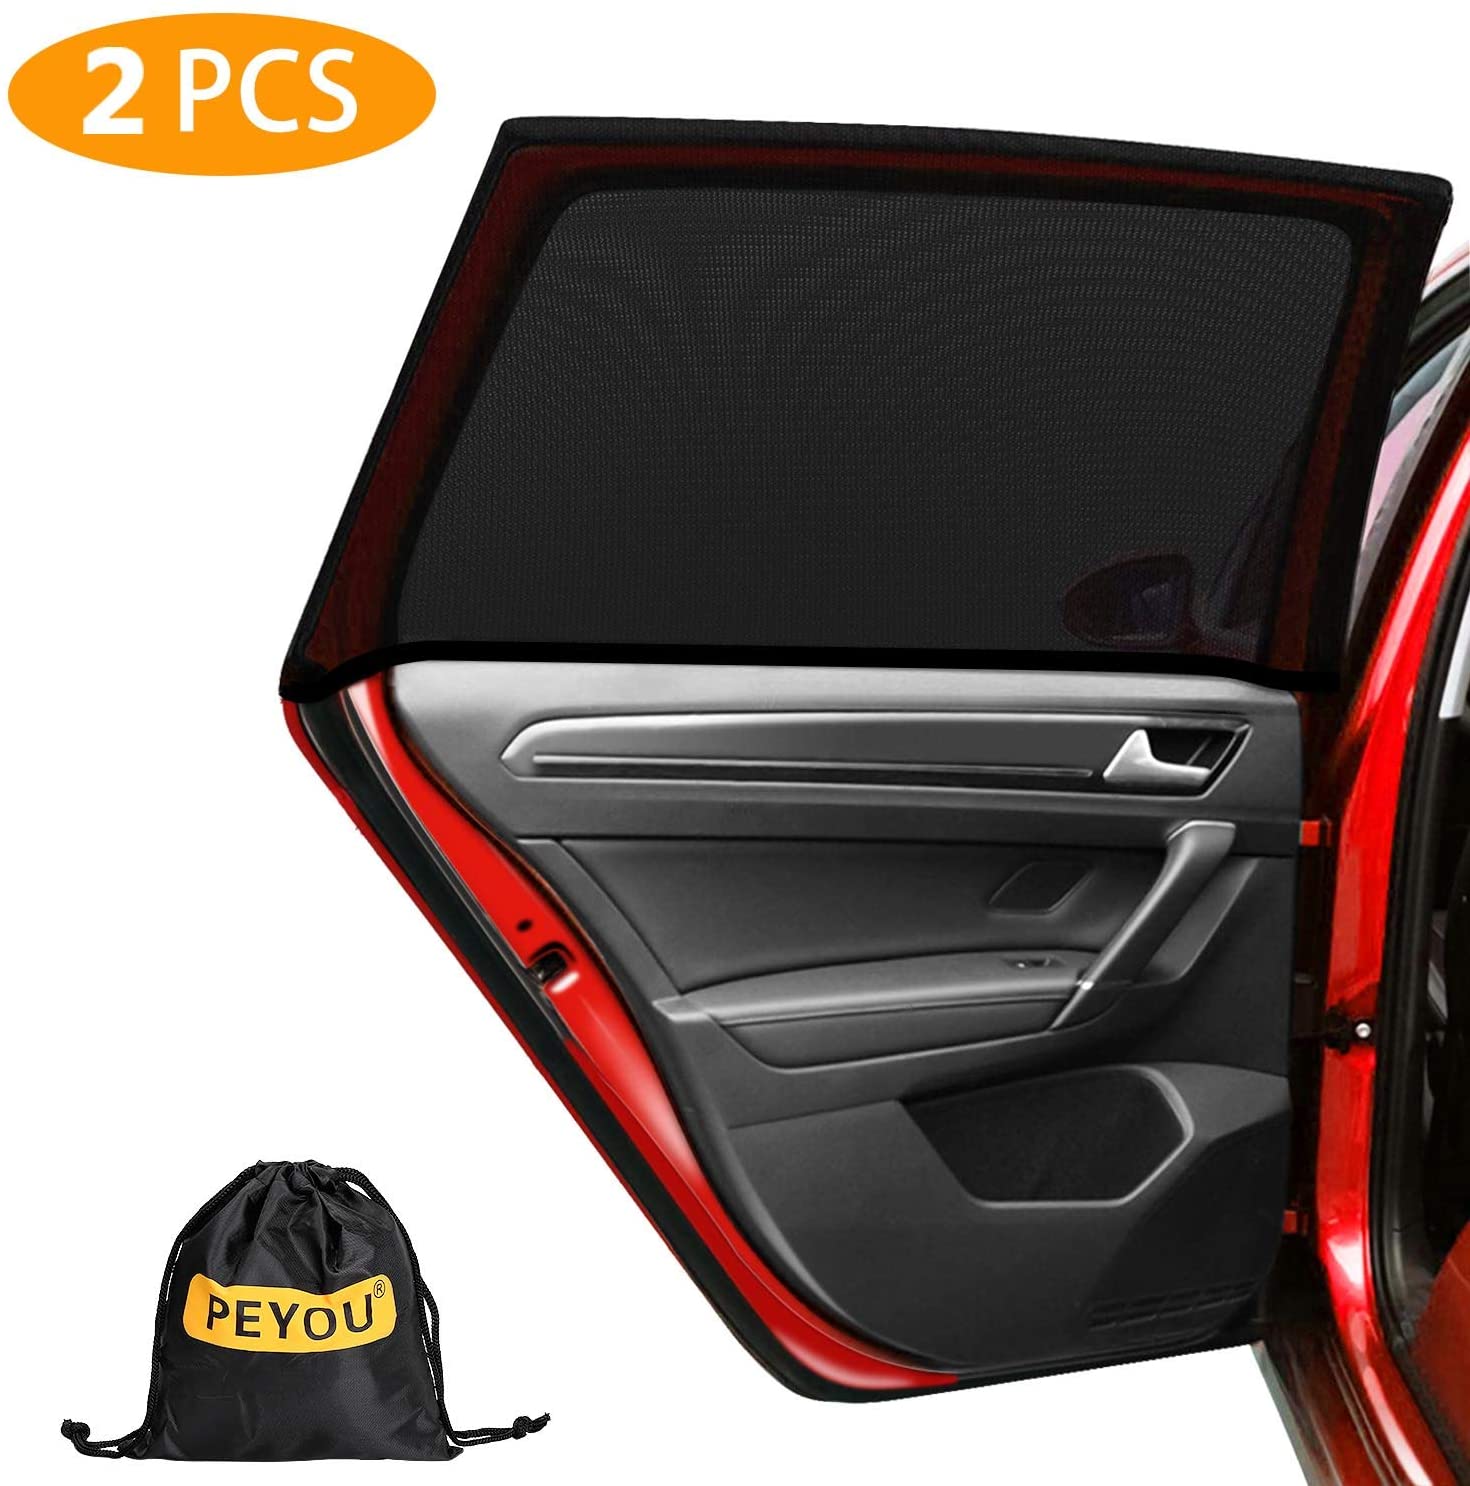 Best Car Sun Shade Reviews & Buyer's Guide 2021